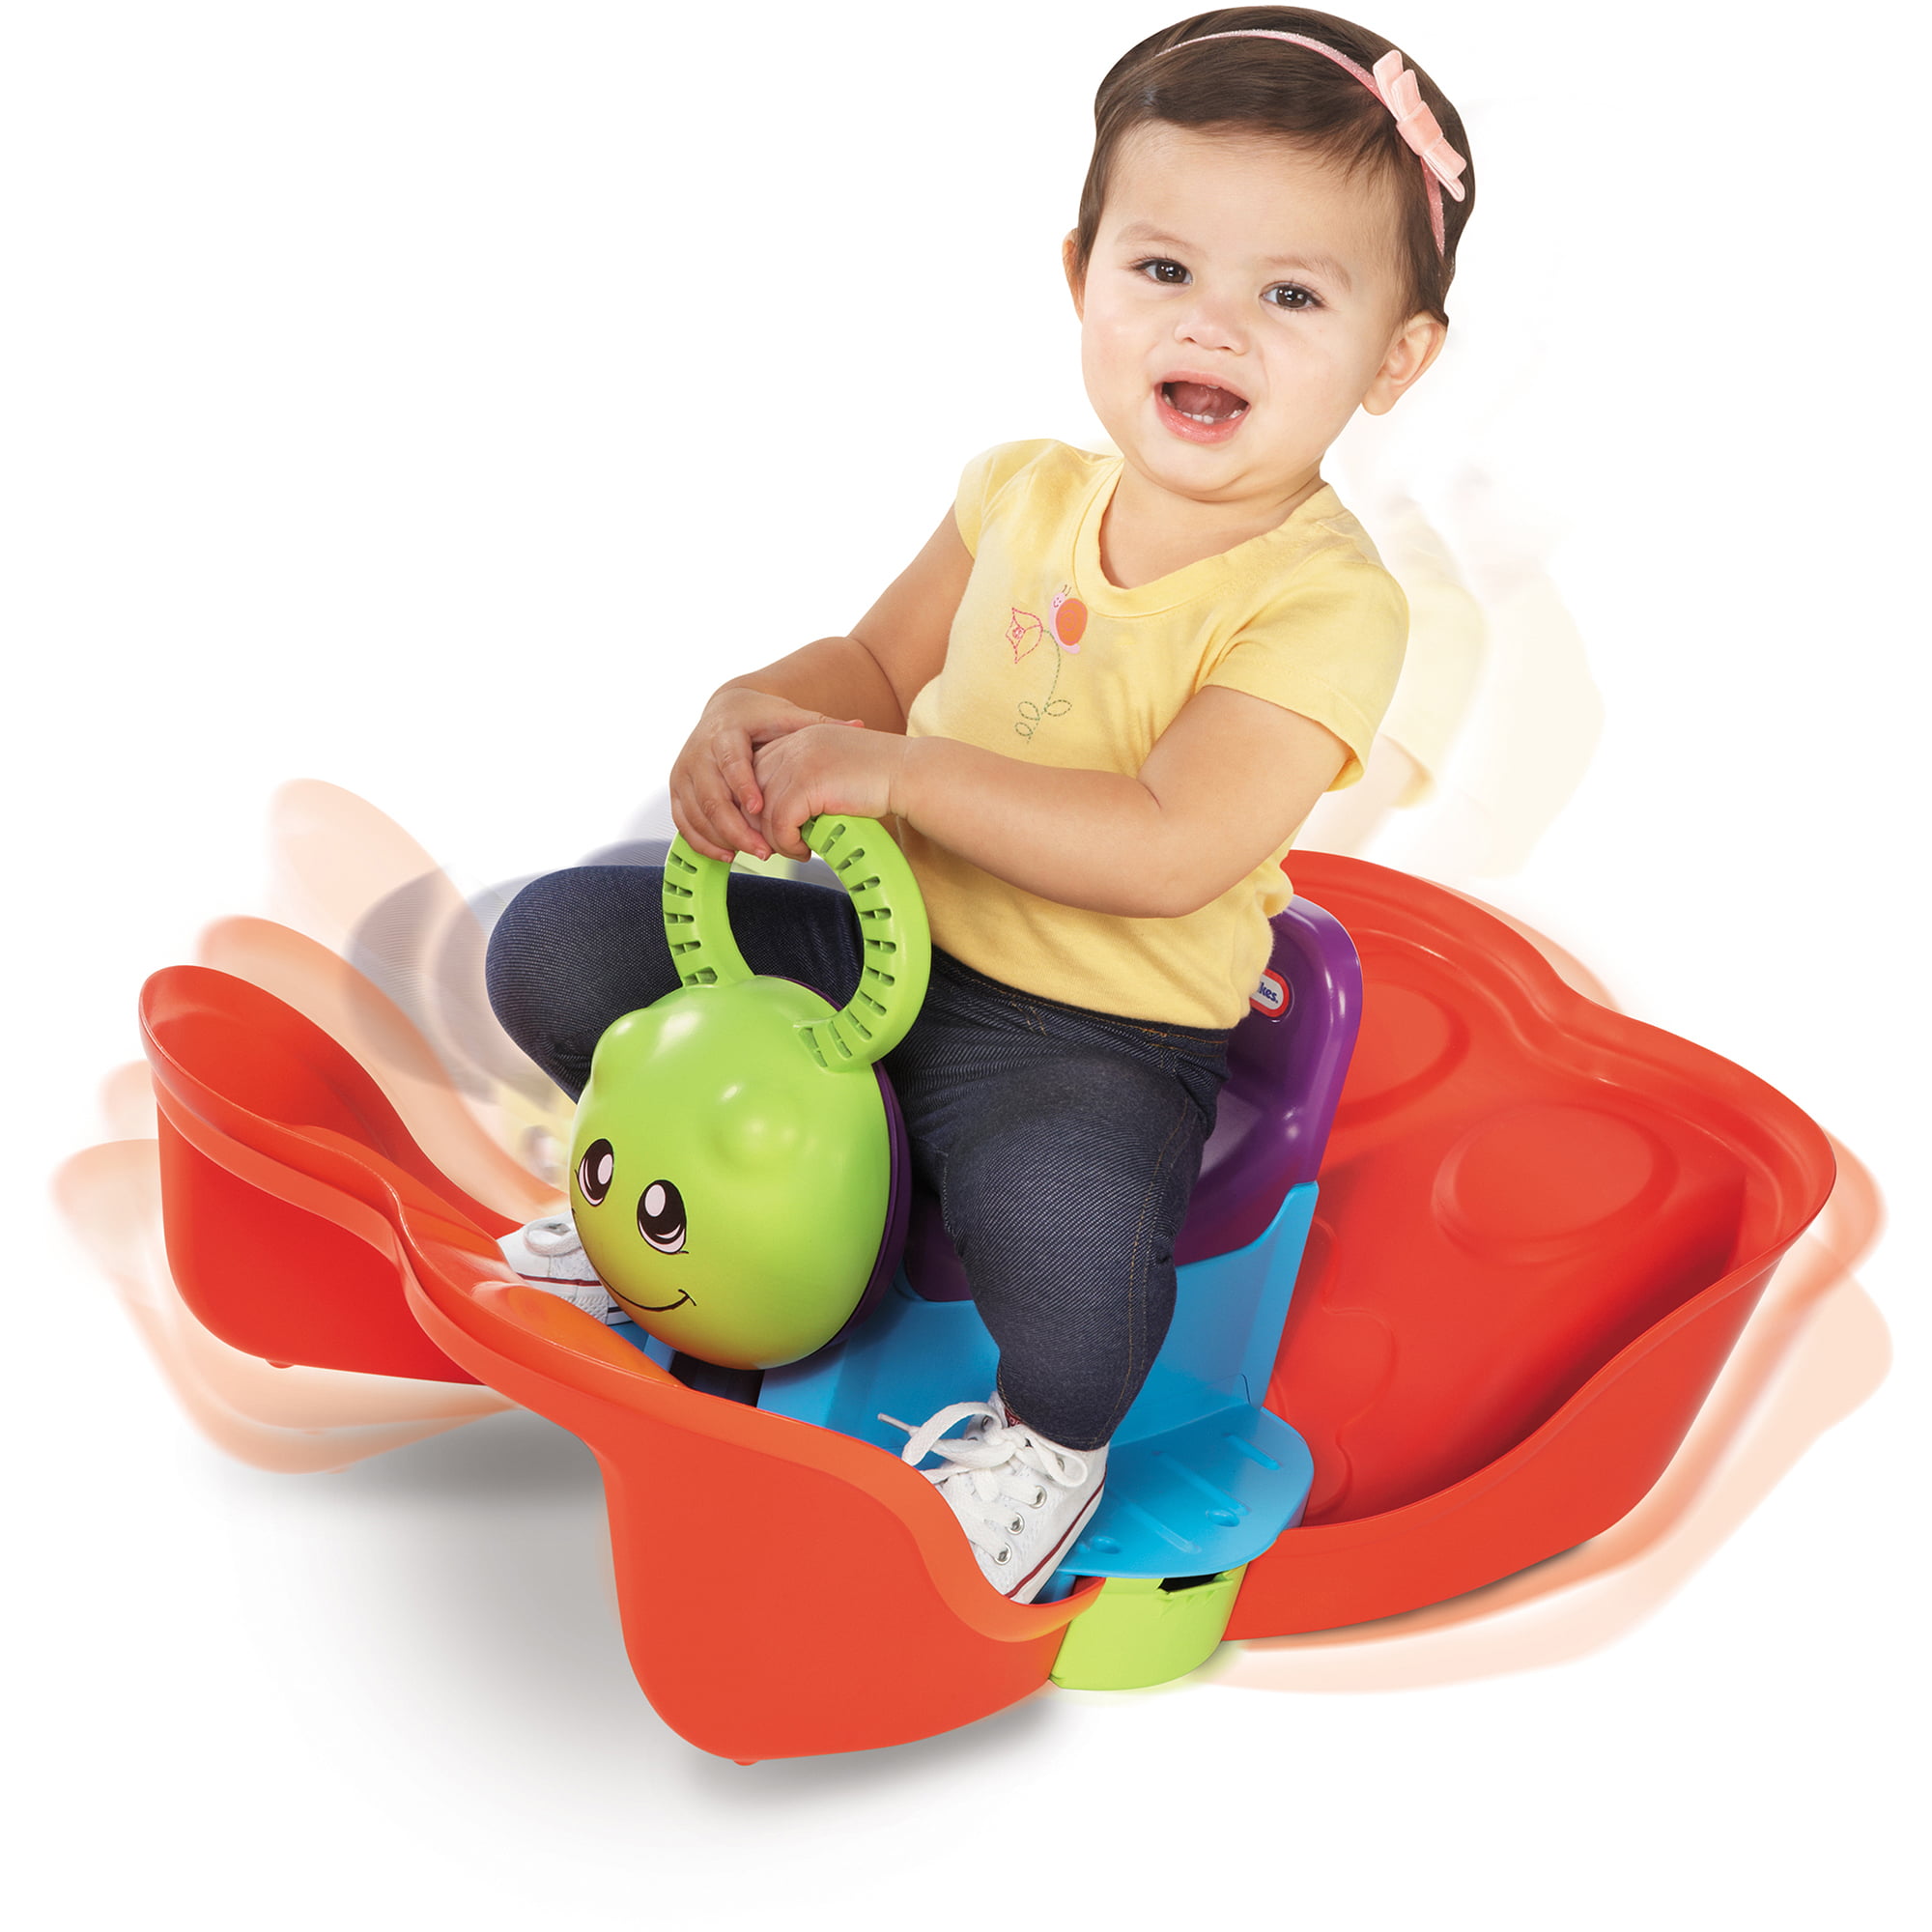 little tikes 3 in 1 activity centre